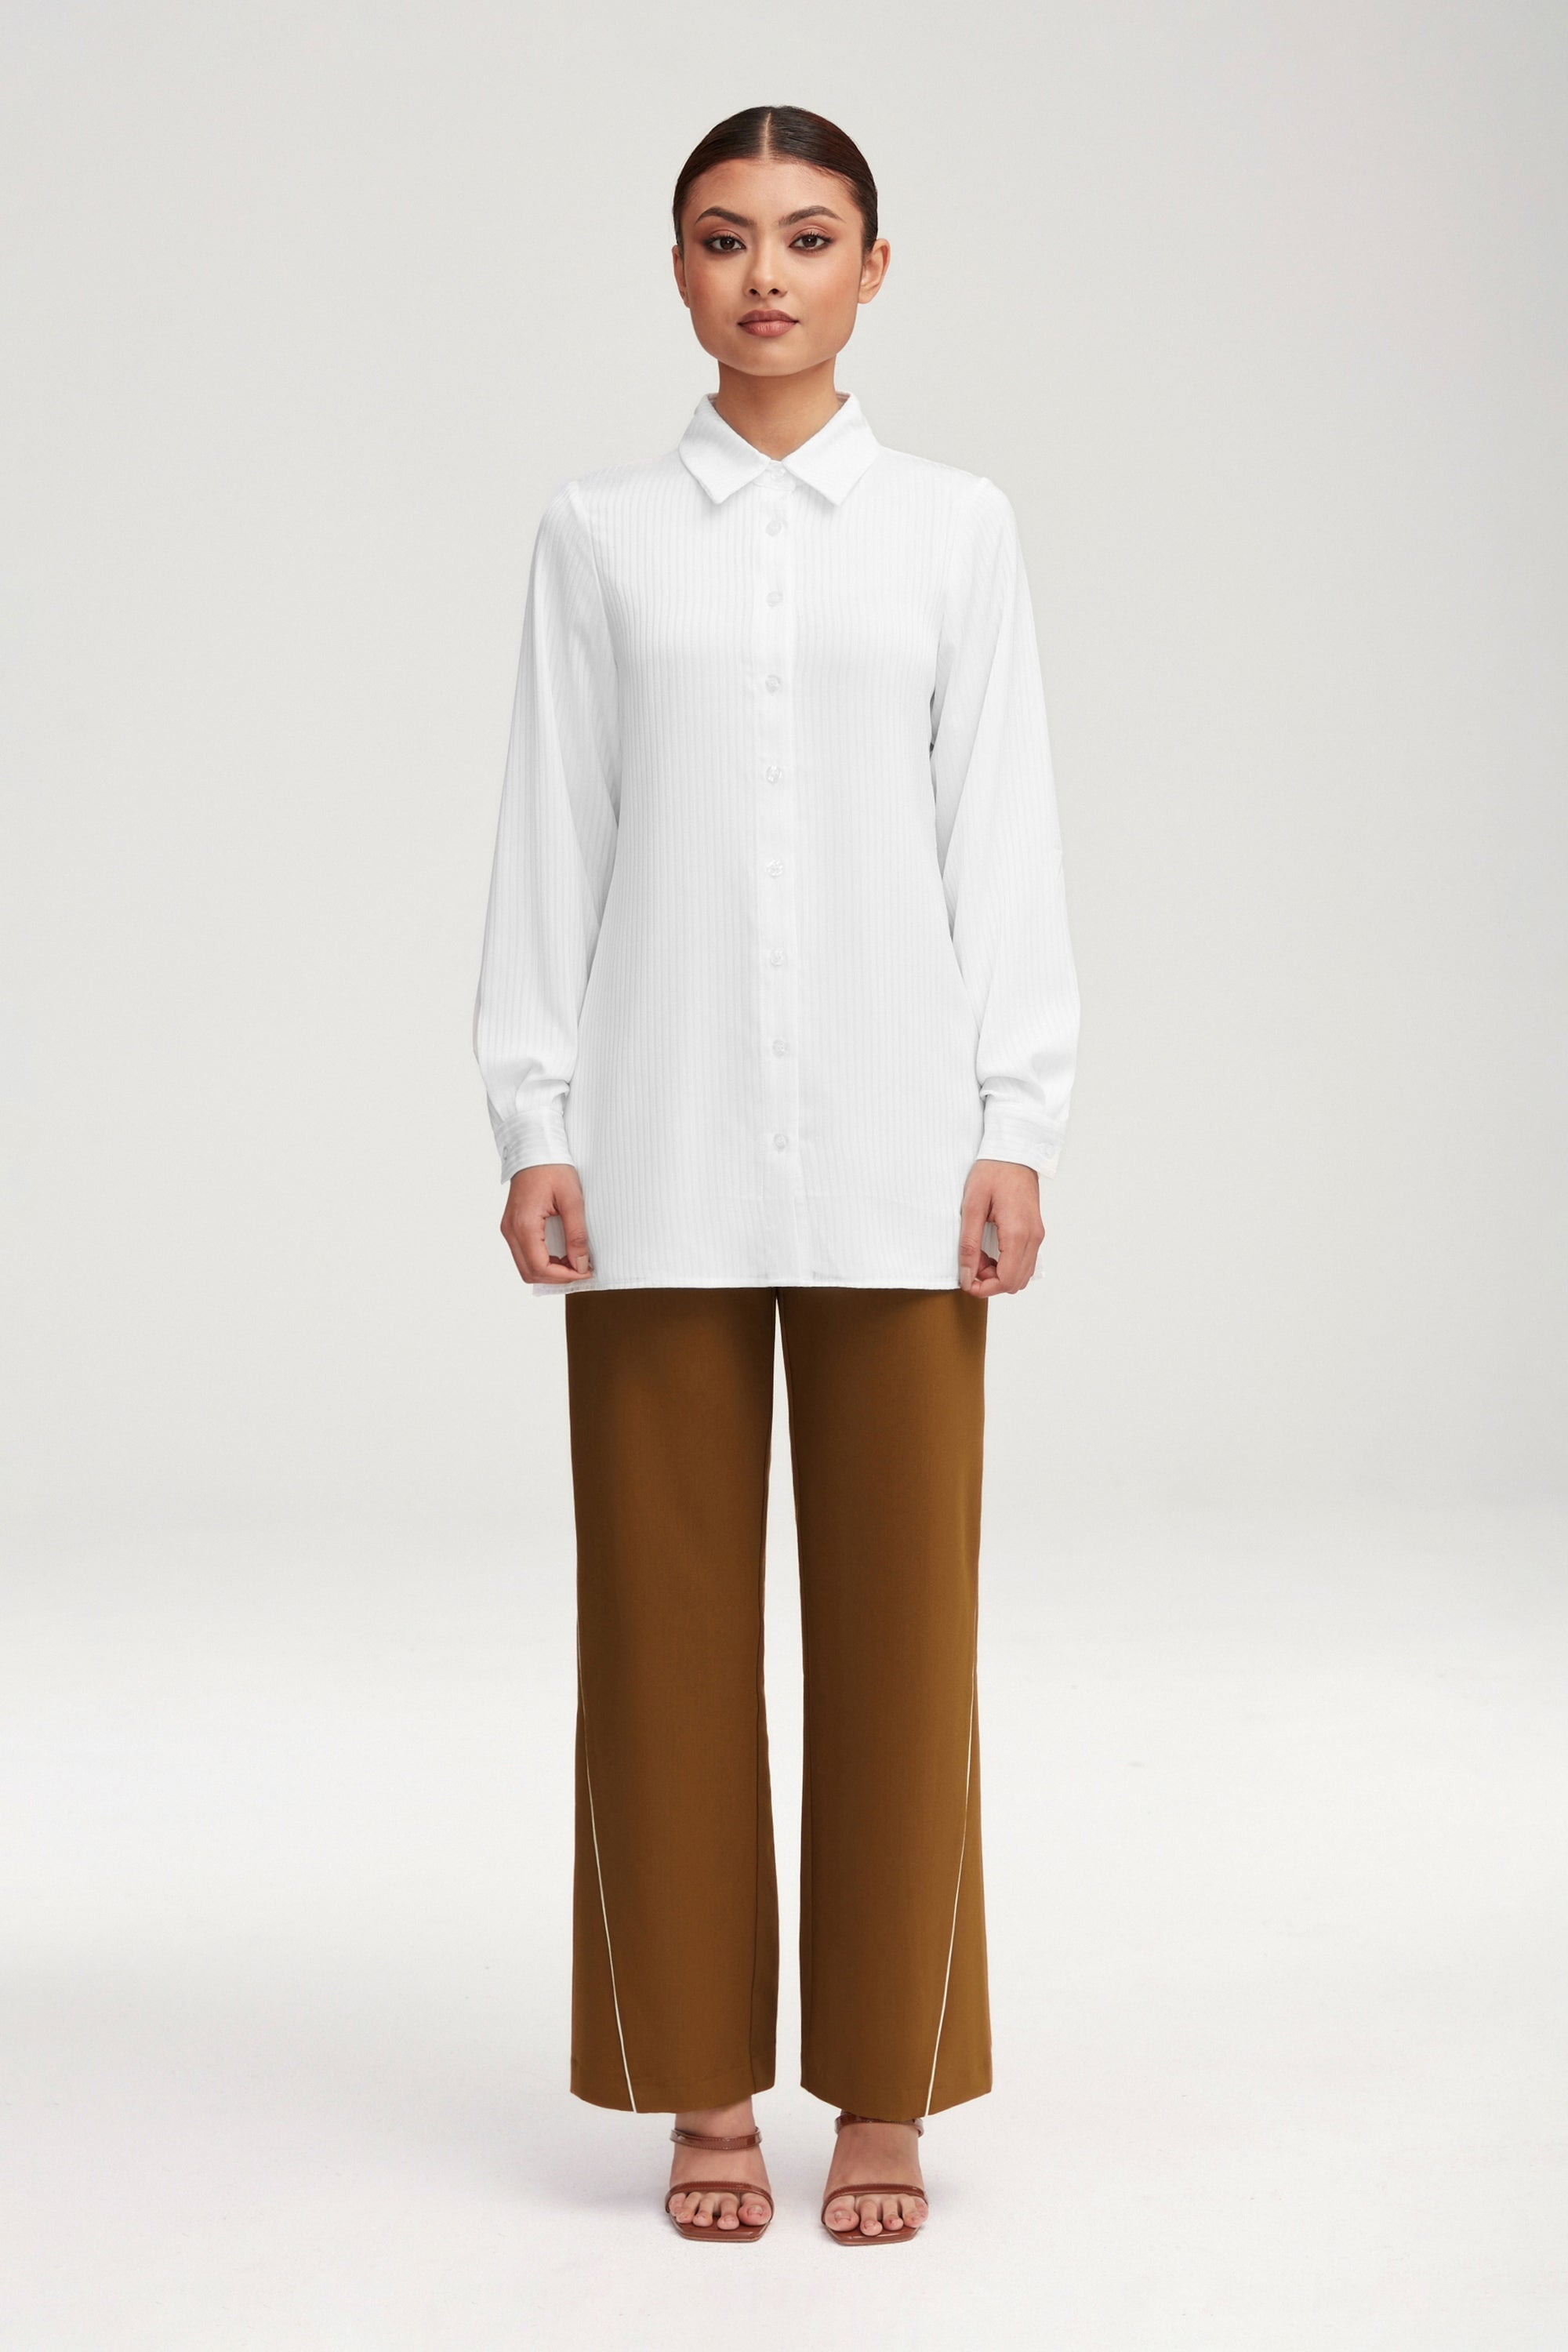 Jaserah Button Down Top - White Clothing Veiled 